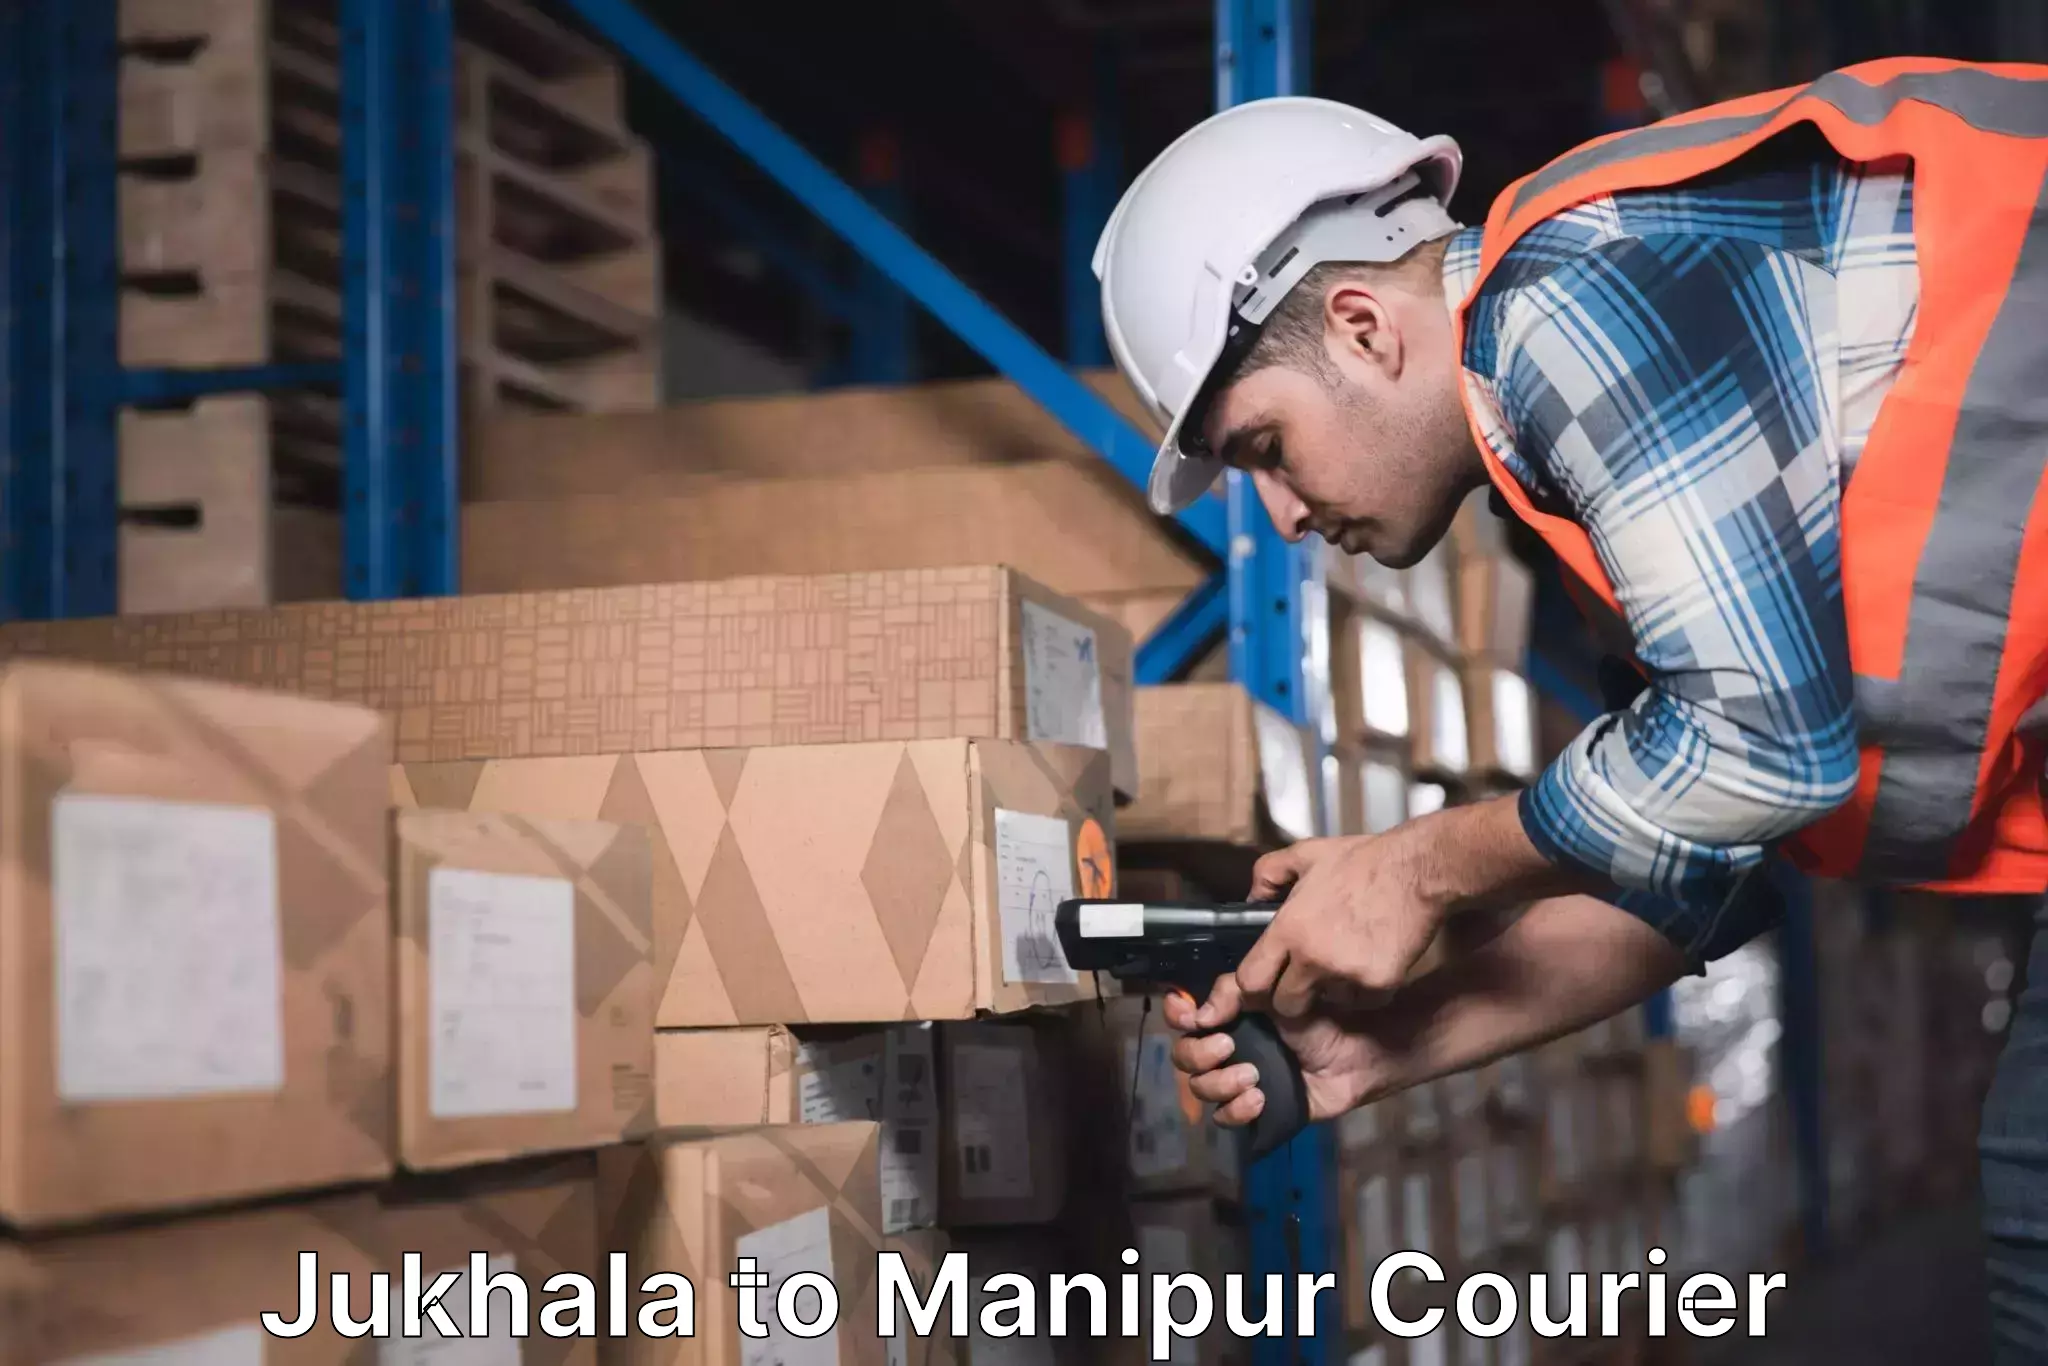 Courier dispatch services Jukhala to Manipur